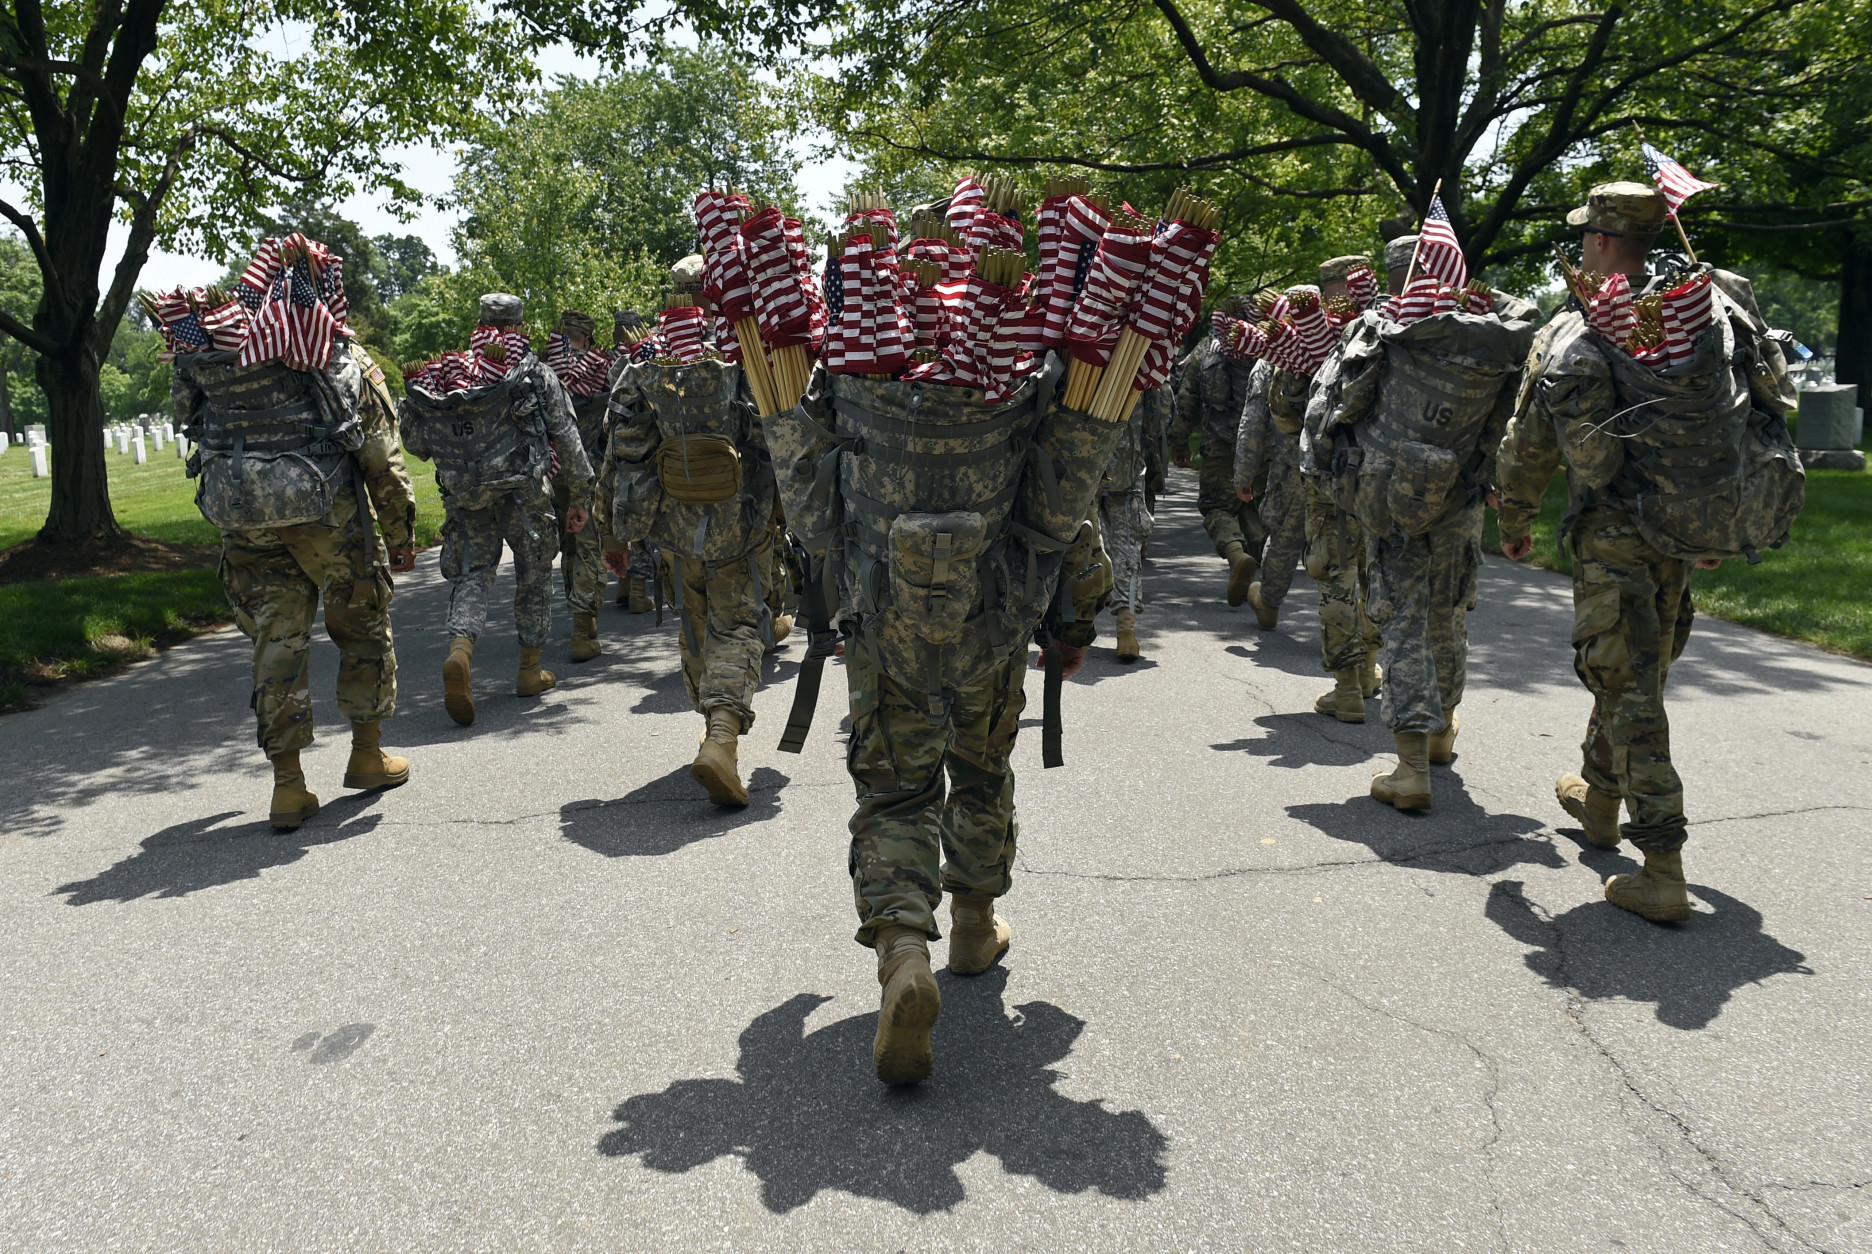 Members of the Old Guard prepare to place flags in front of every headstone at Arlington National Cemetery in Arlington, Va., Thursday, May 26, 2016. Soldiers were to place nearly a quarter of a million U.S. flags at the cemetery as part of a Memorial Day tradition. (AP Photo/Susan Walsh)